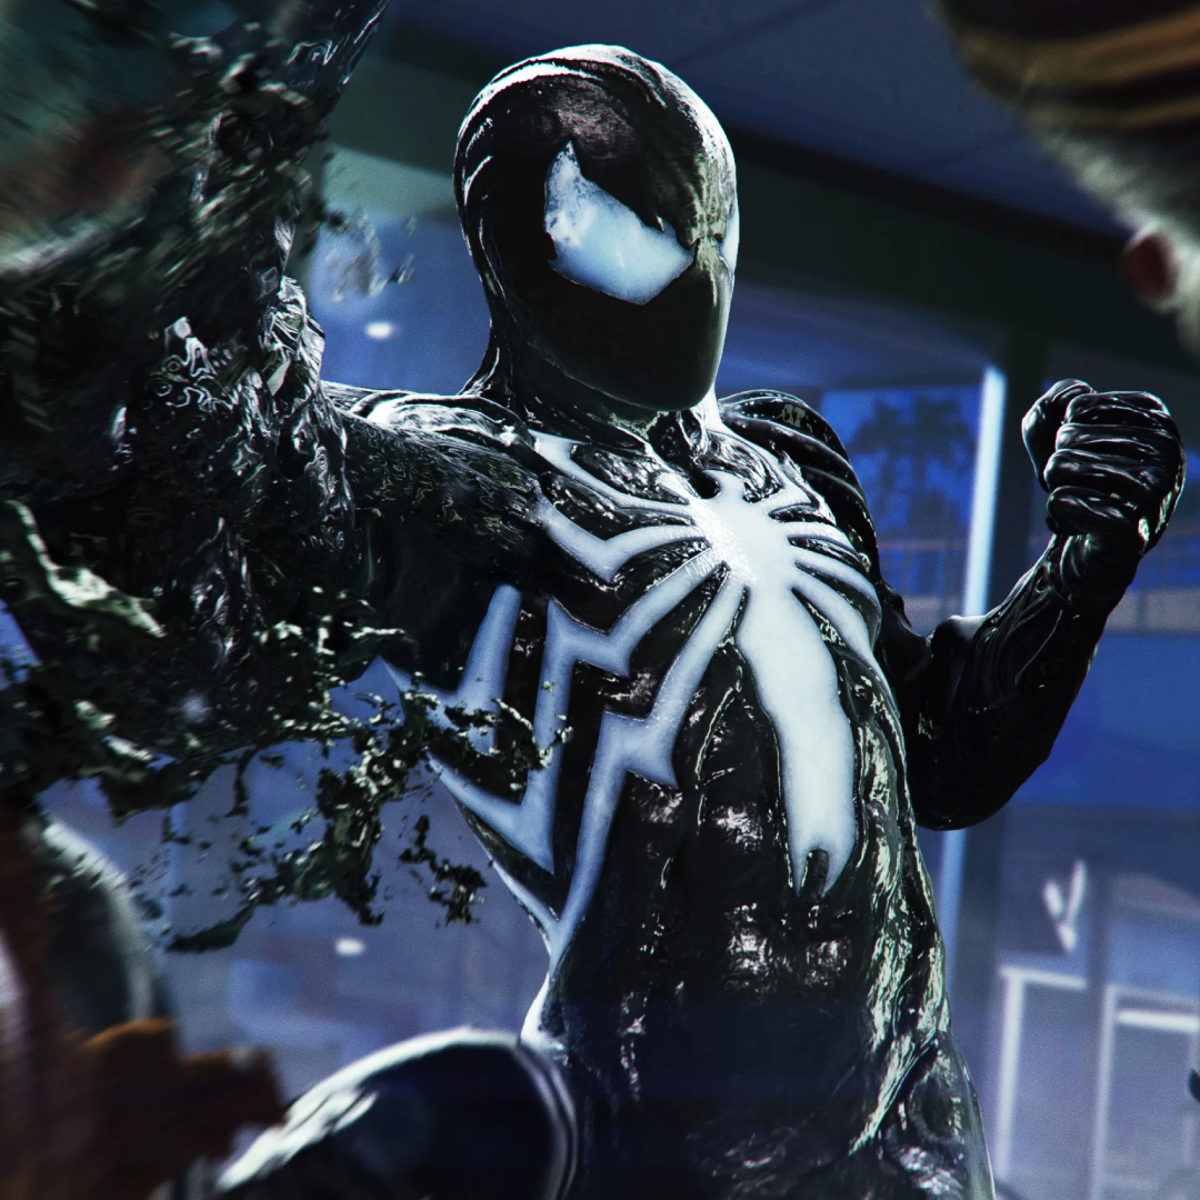 Marvel's Spider-Man 2 review